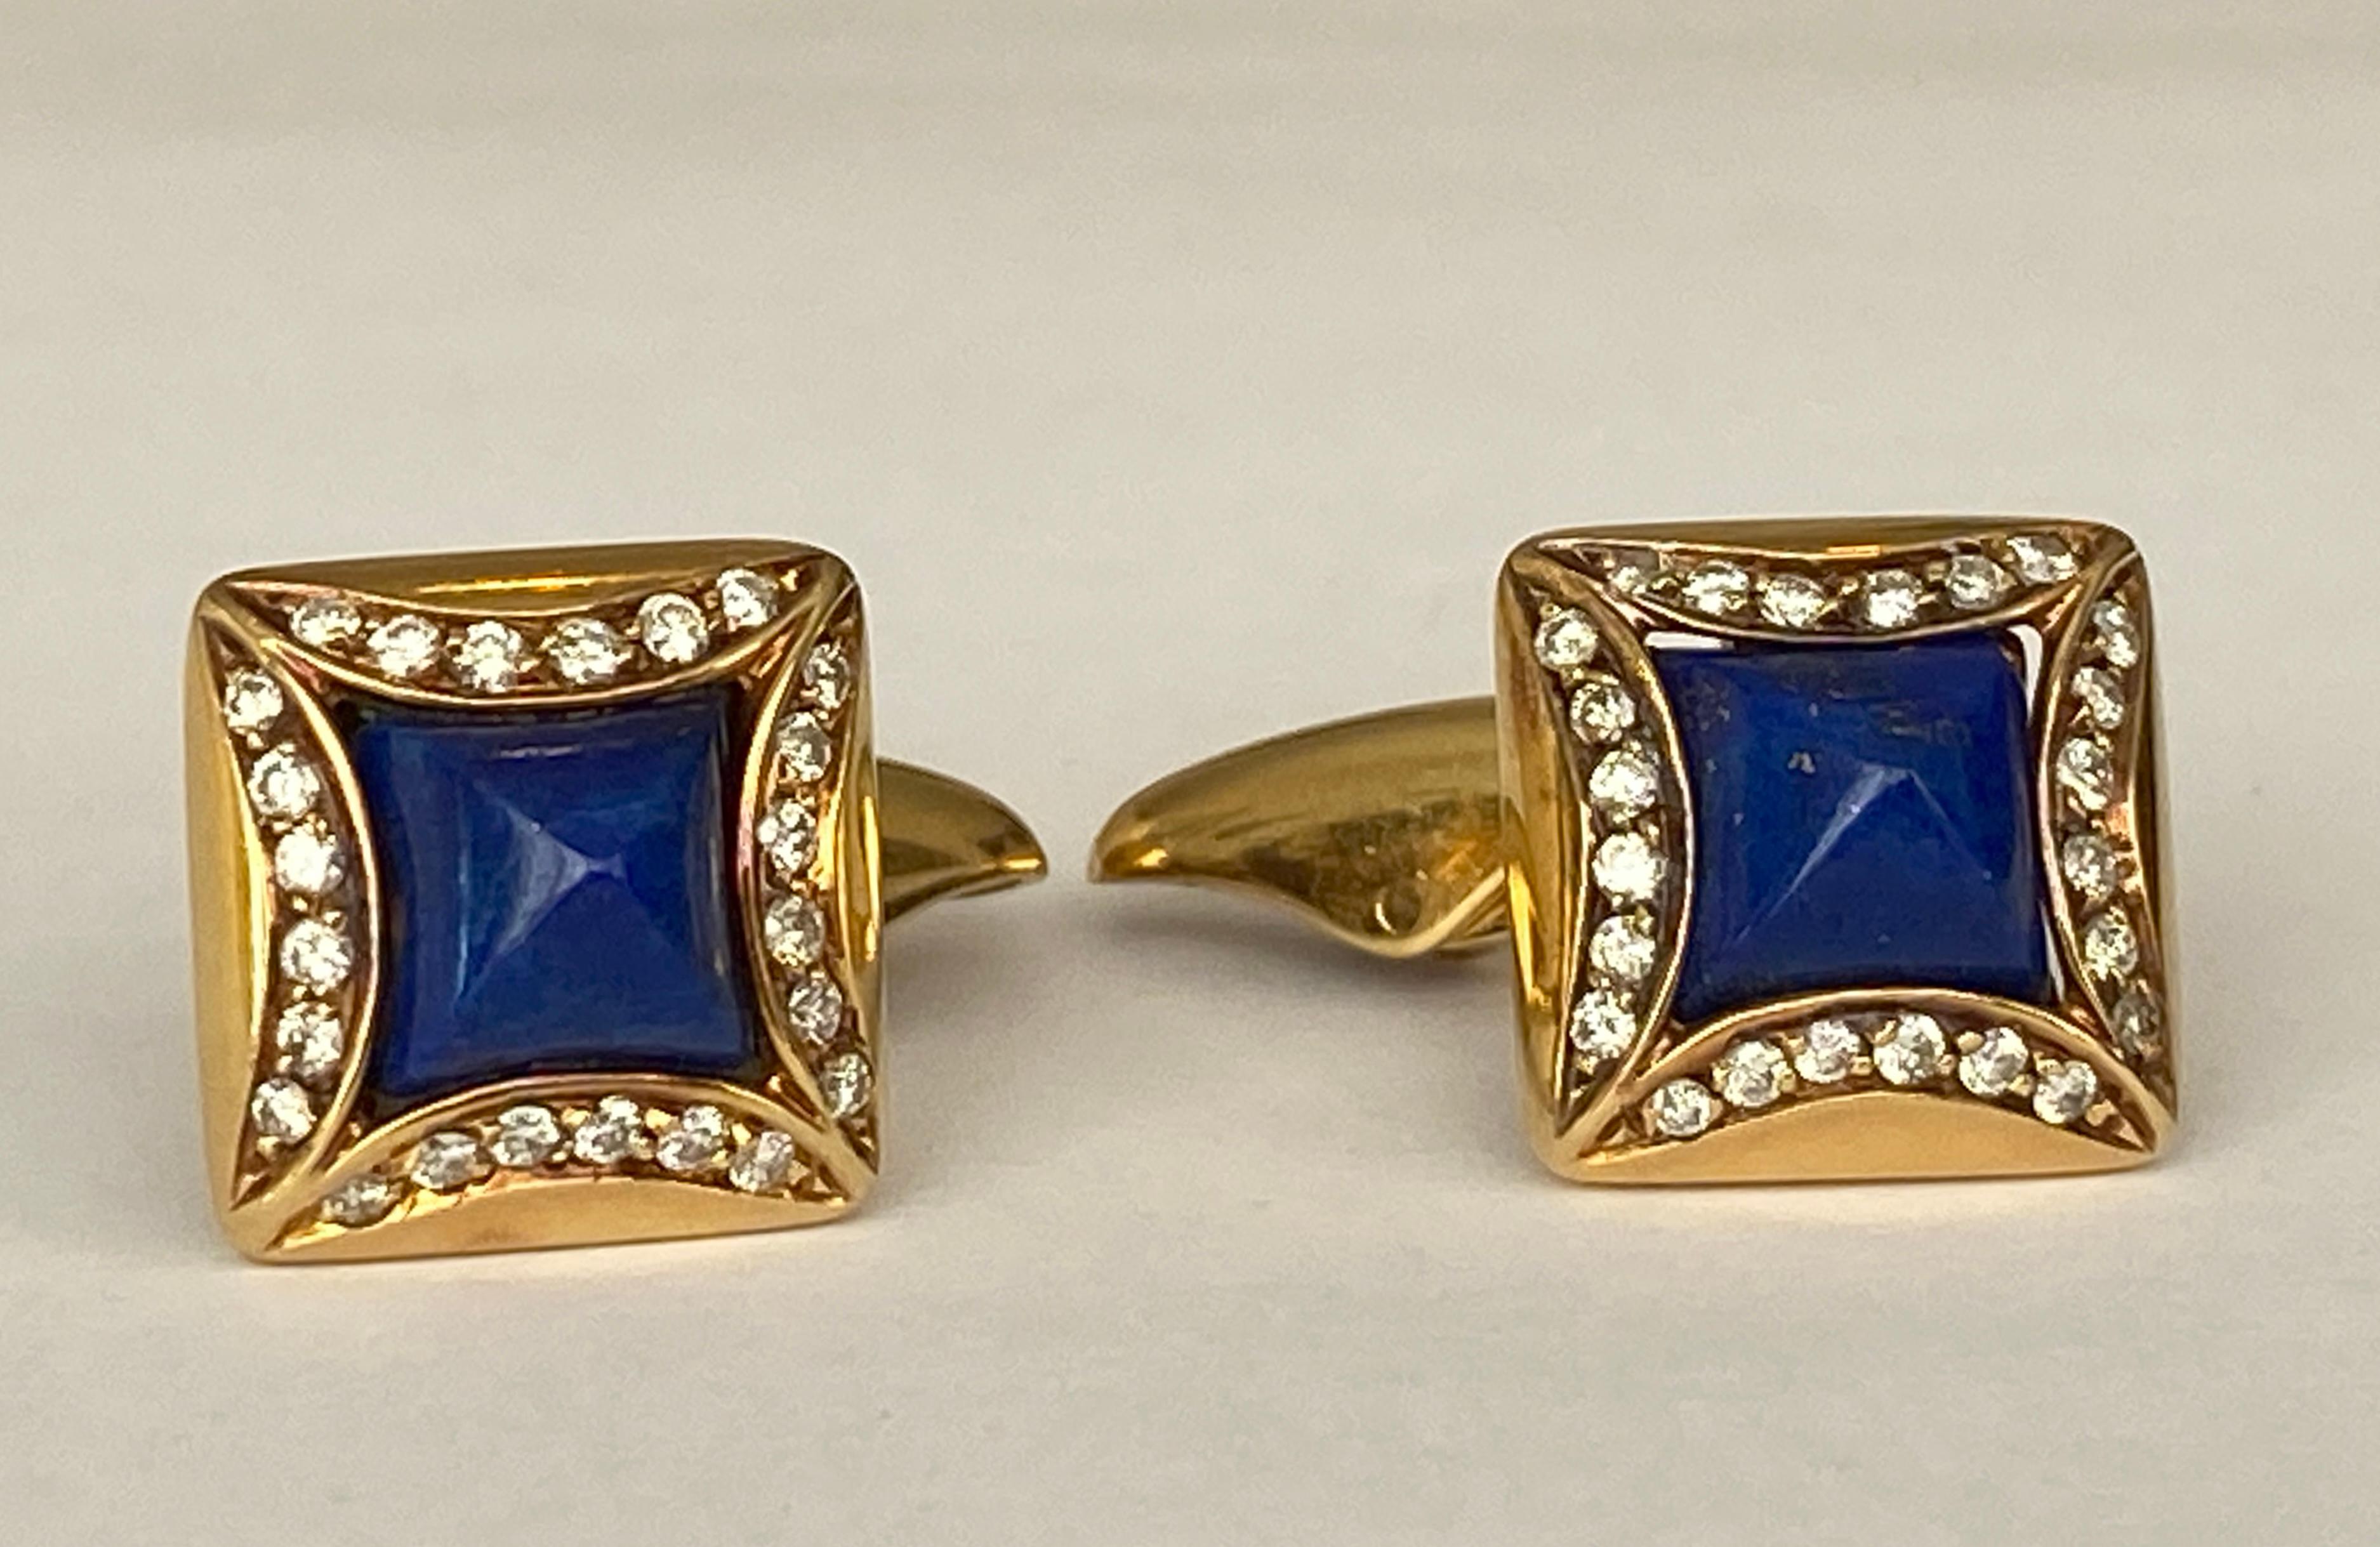 Offered: 18 kt yellow gold cufflinks with lapis lazuli, surrounded by 48 brilliant-cut diamonds, approx. 0.48 ct, G/VS. The cufflinks are in good condition. Signed: 18 kt Italy and numbered. Grade: 750 (engraved)

Size: 13mm*13mm *20mm
Weight:11.8